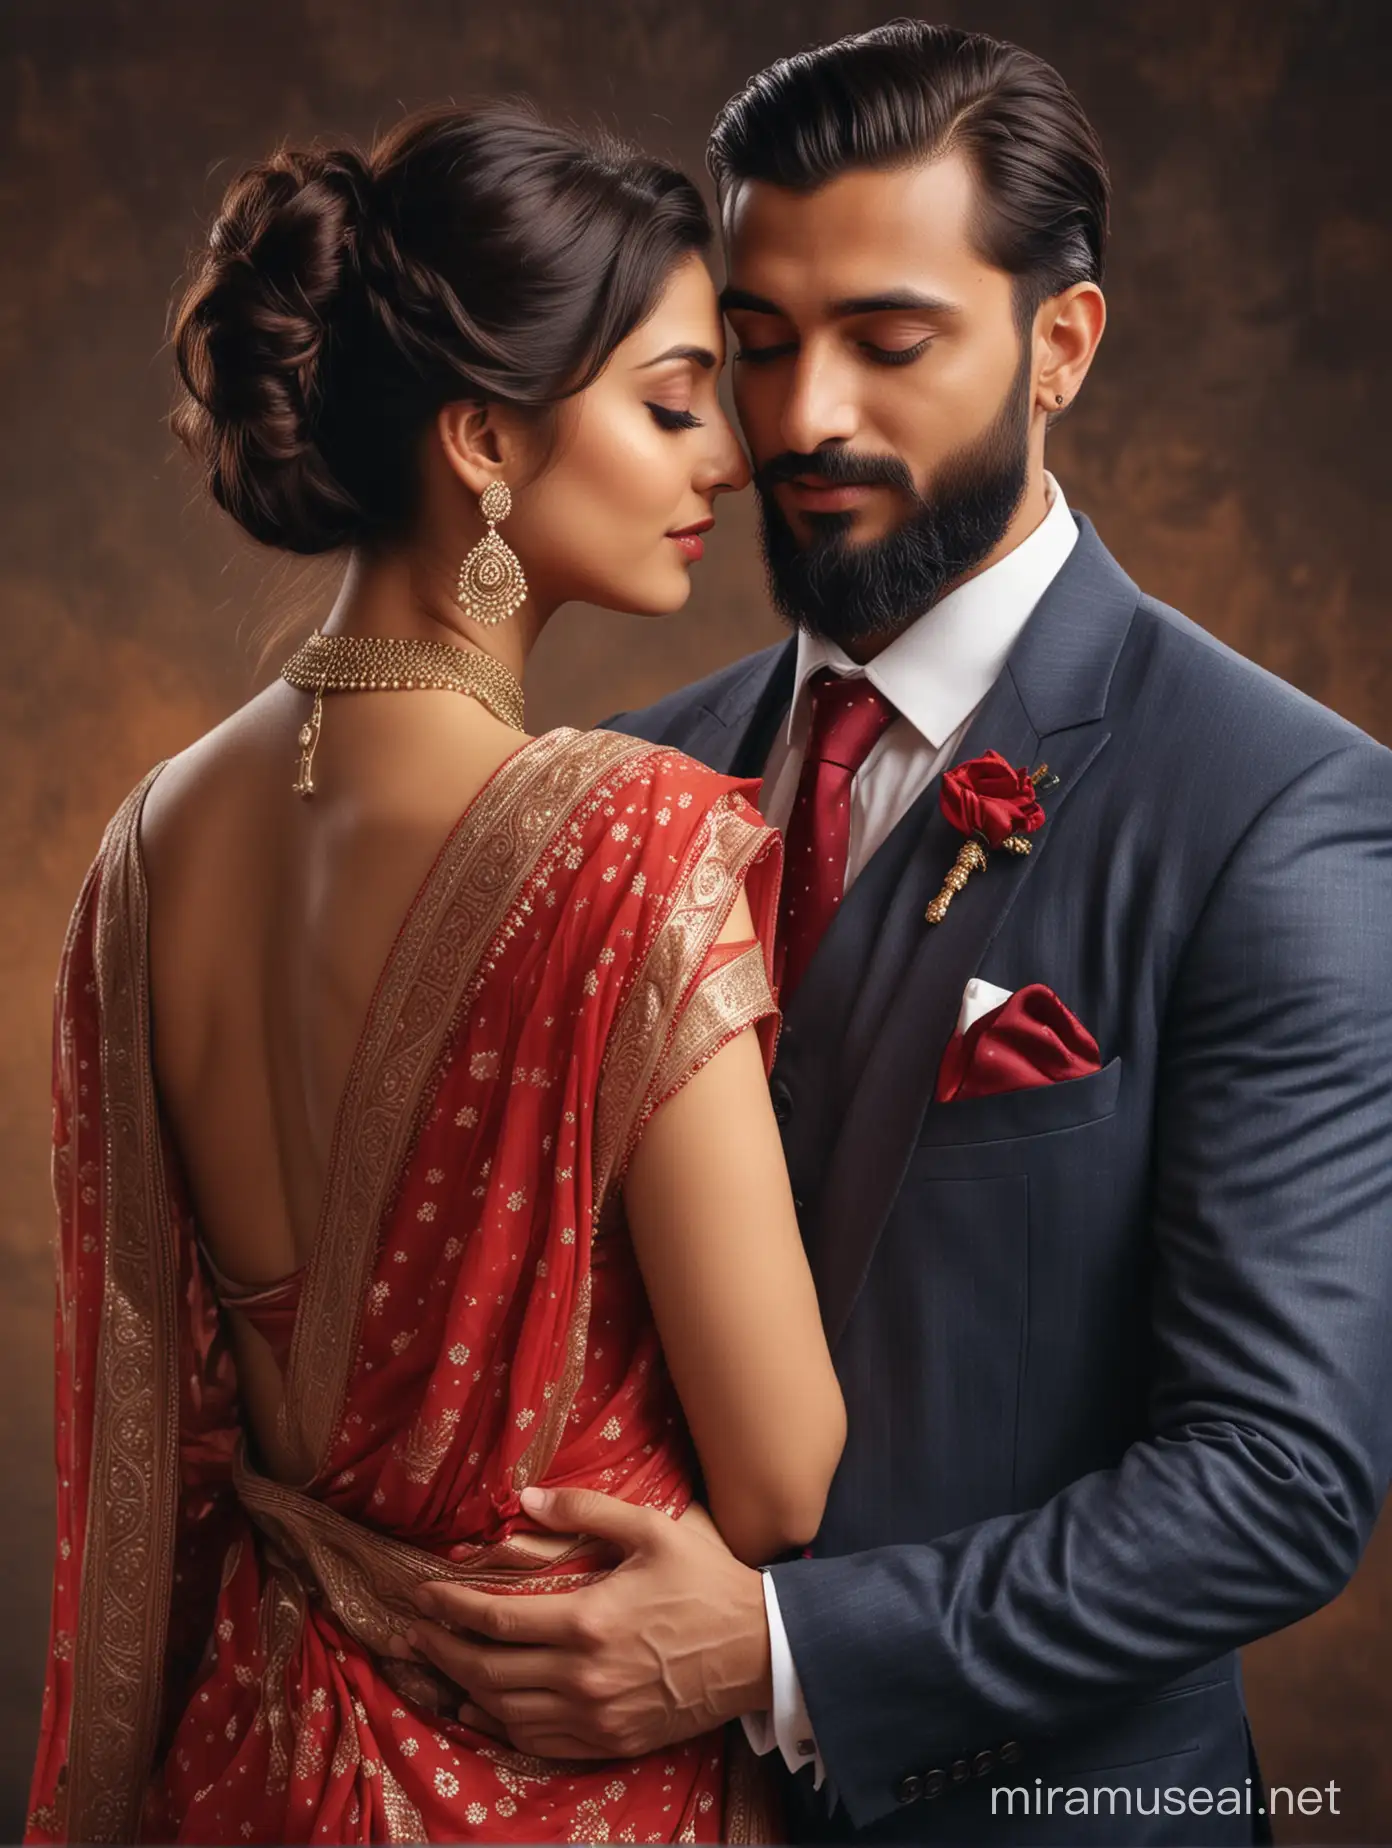 full portrait photo of most beautiful european couple as most beautiful indian couple, most beautiful girl in saree,  low cut back with big knot, red dot,  full makeup, NECKLACE,  embracing man from back side, girl holding man from back, girl holding man from back with emotional attachment and ecstasy, man with stylish beard and in formals and tie, photo realistic, 4k.